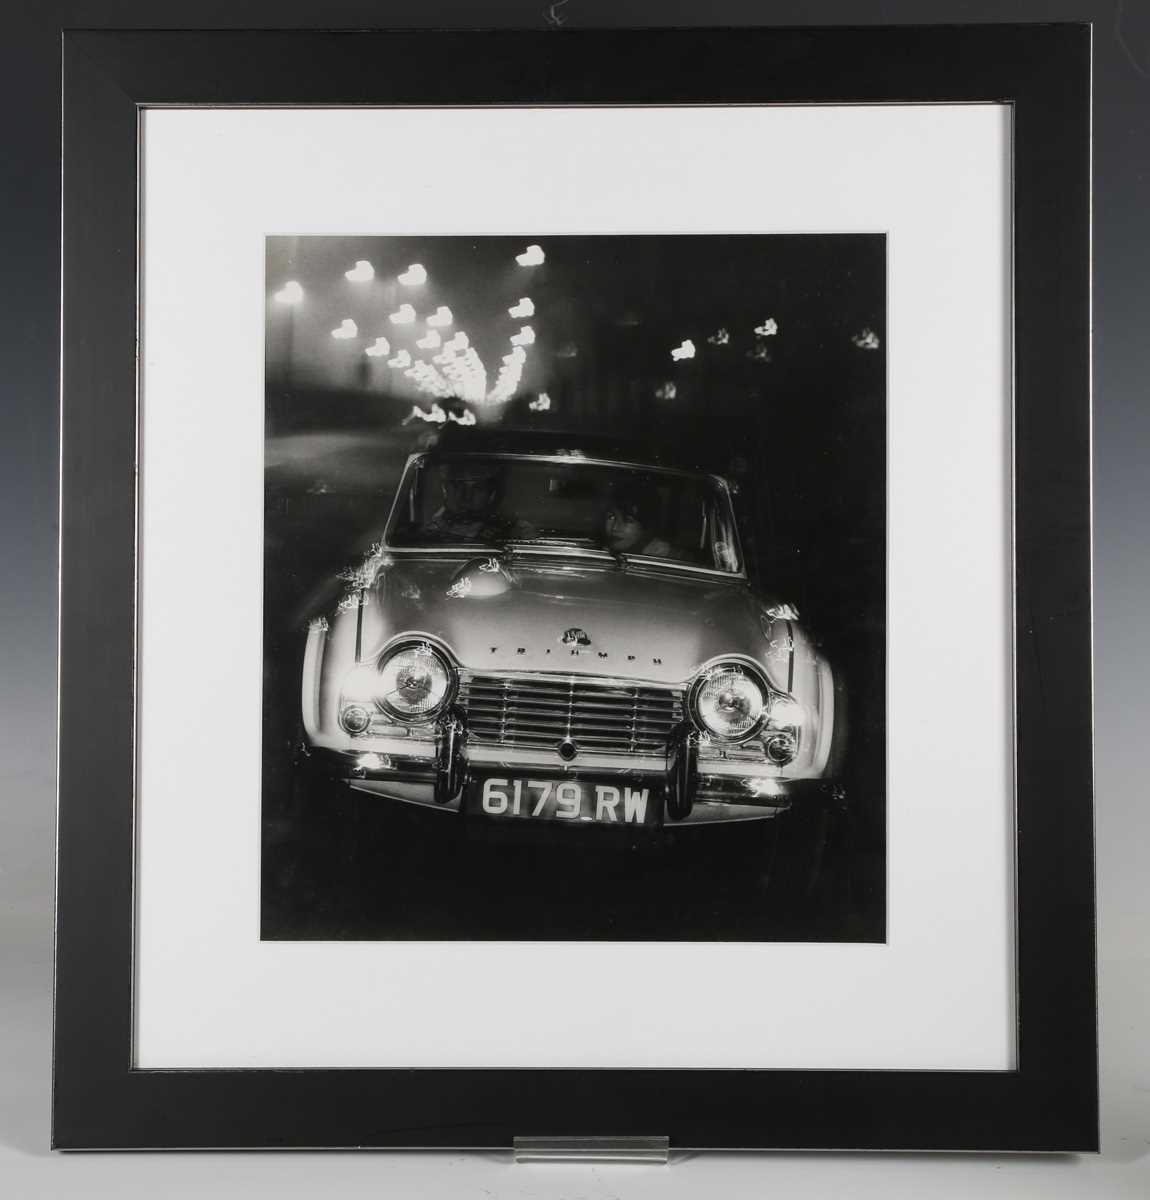 PHOTOGRAPHS. A black and white photograph of a Triumph TR4 driving along a street-lit road, 1960s or